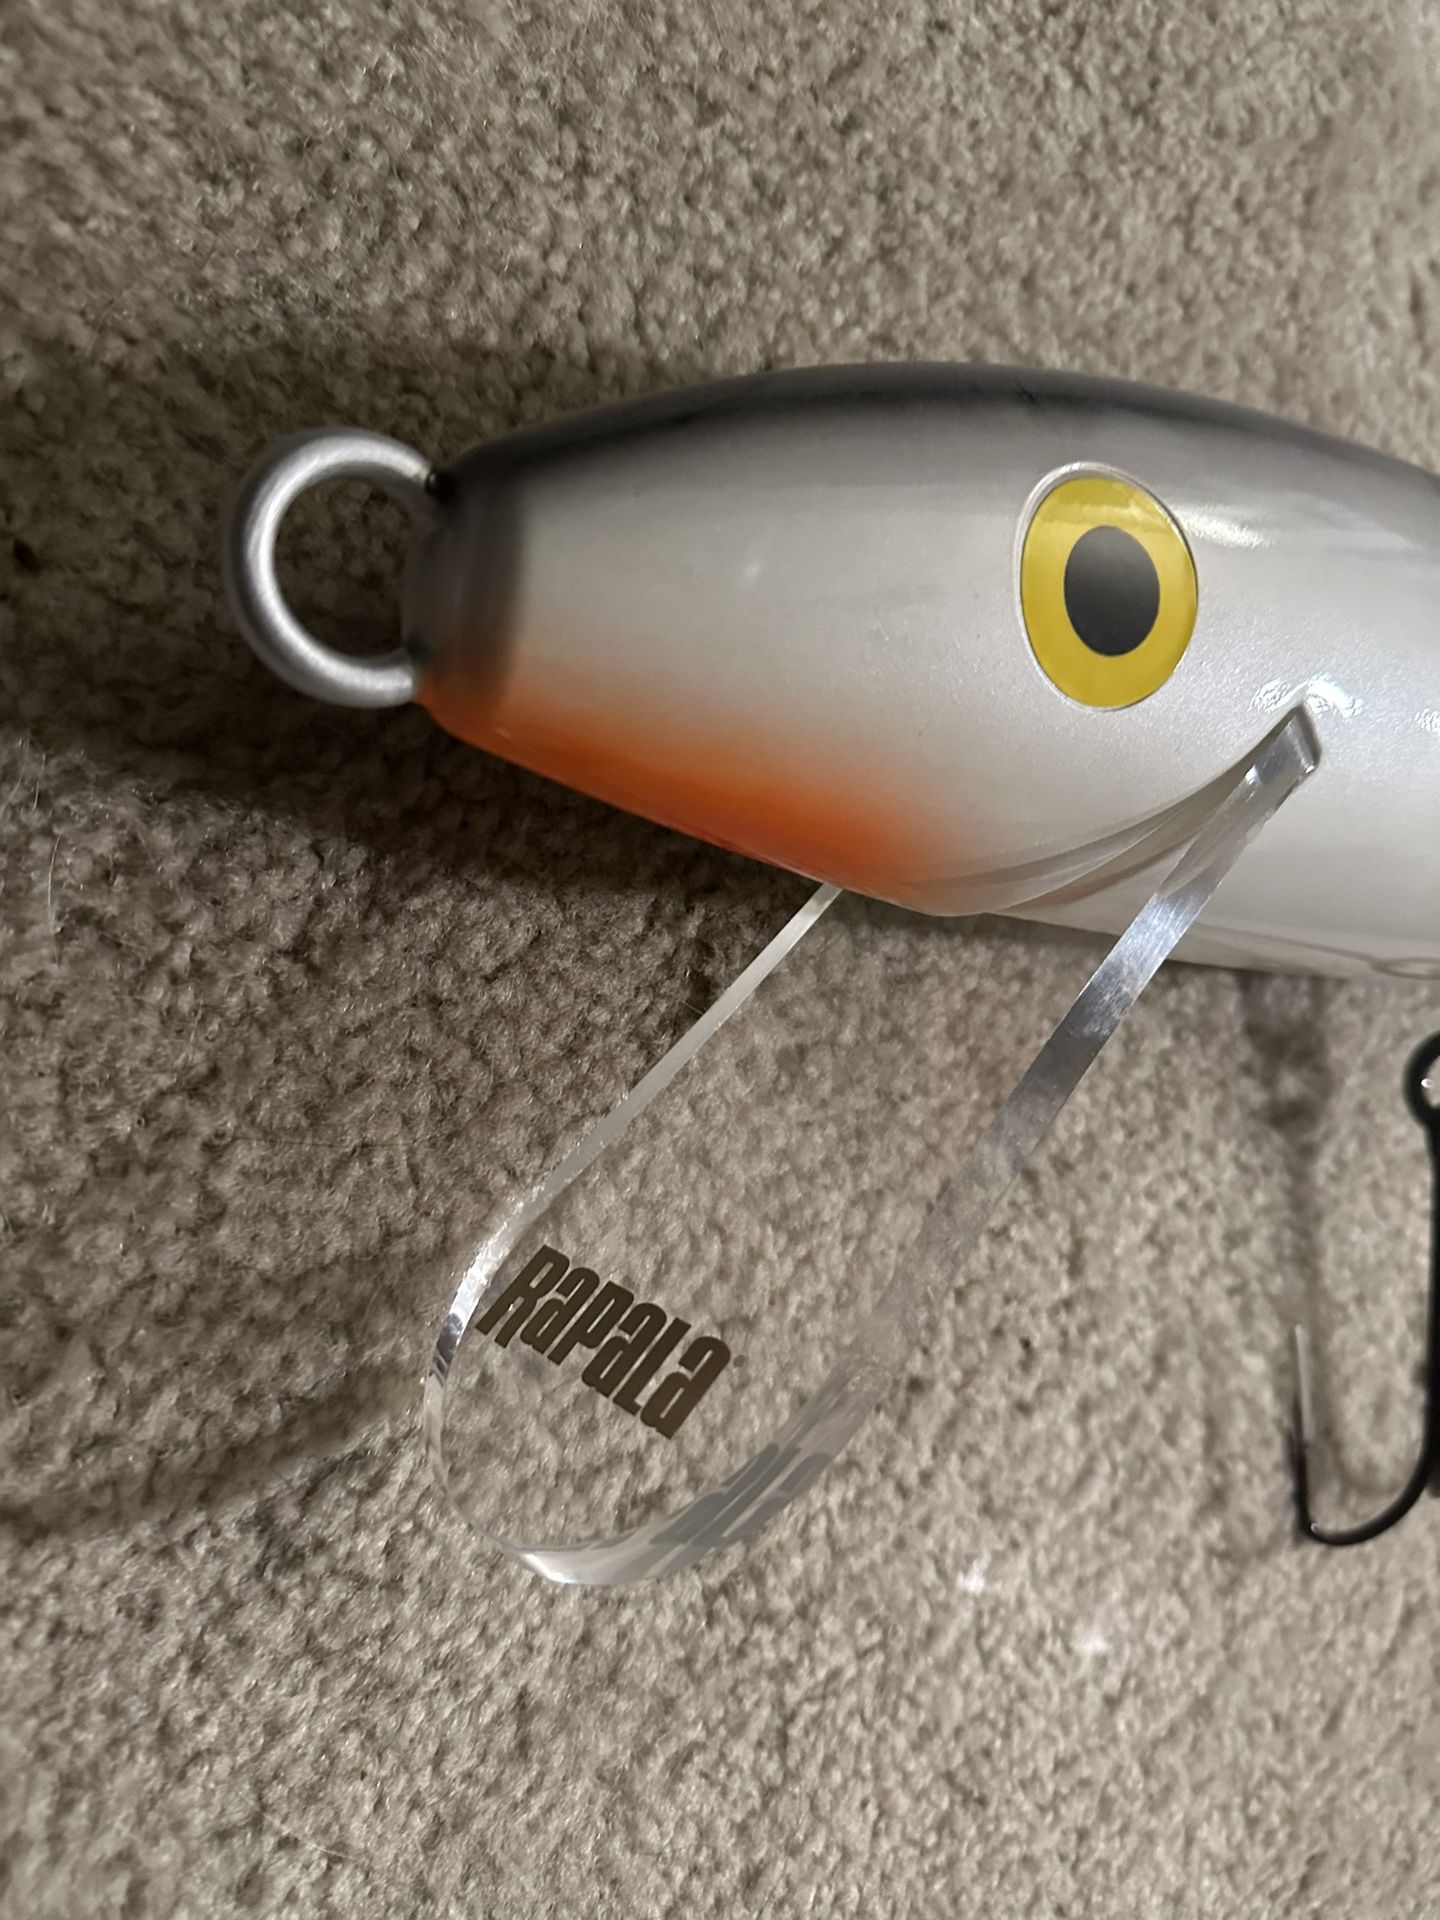 Rapala Giant Lure Wall Decoration for Sale in Las Vegas, NV - OfferUp